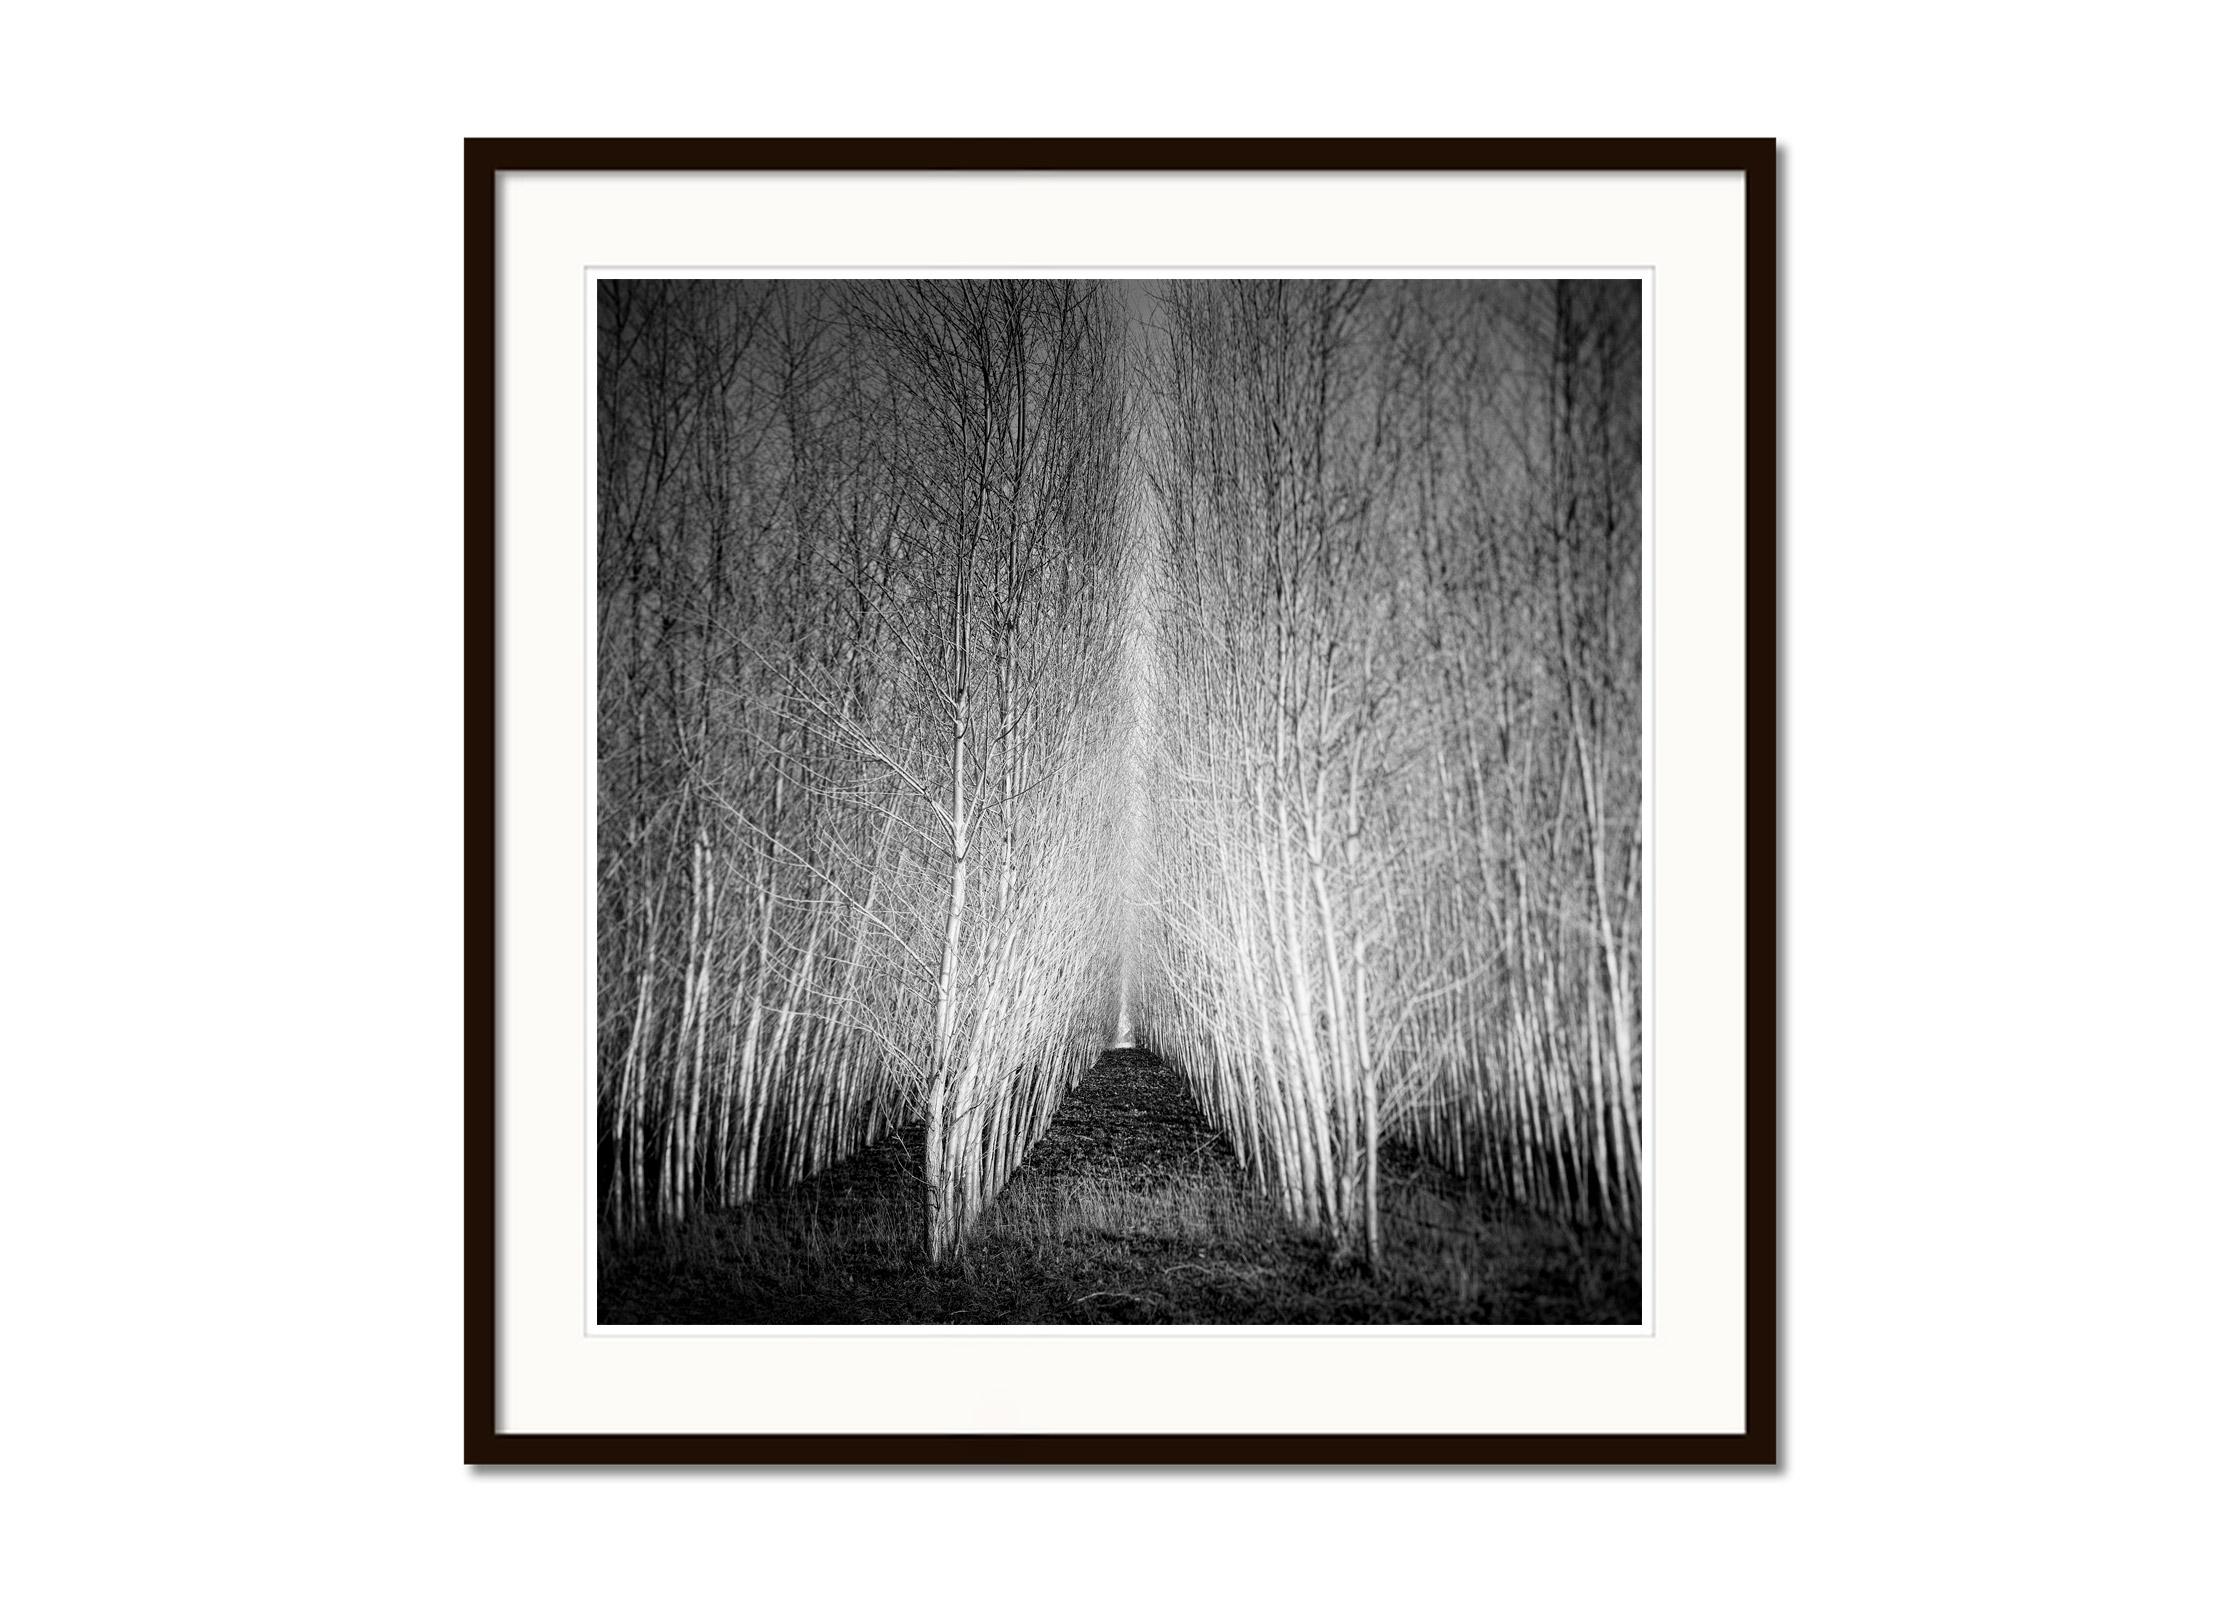 Populus Forest, tree avenue, Austria, black and white art landscape photography - Gray Black and White Photograph by Gerald Berghammer